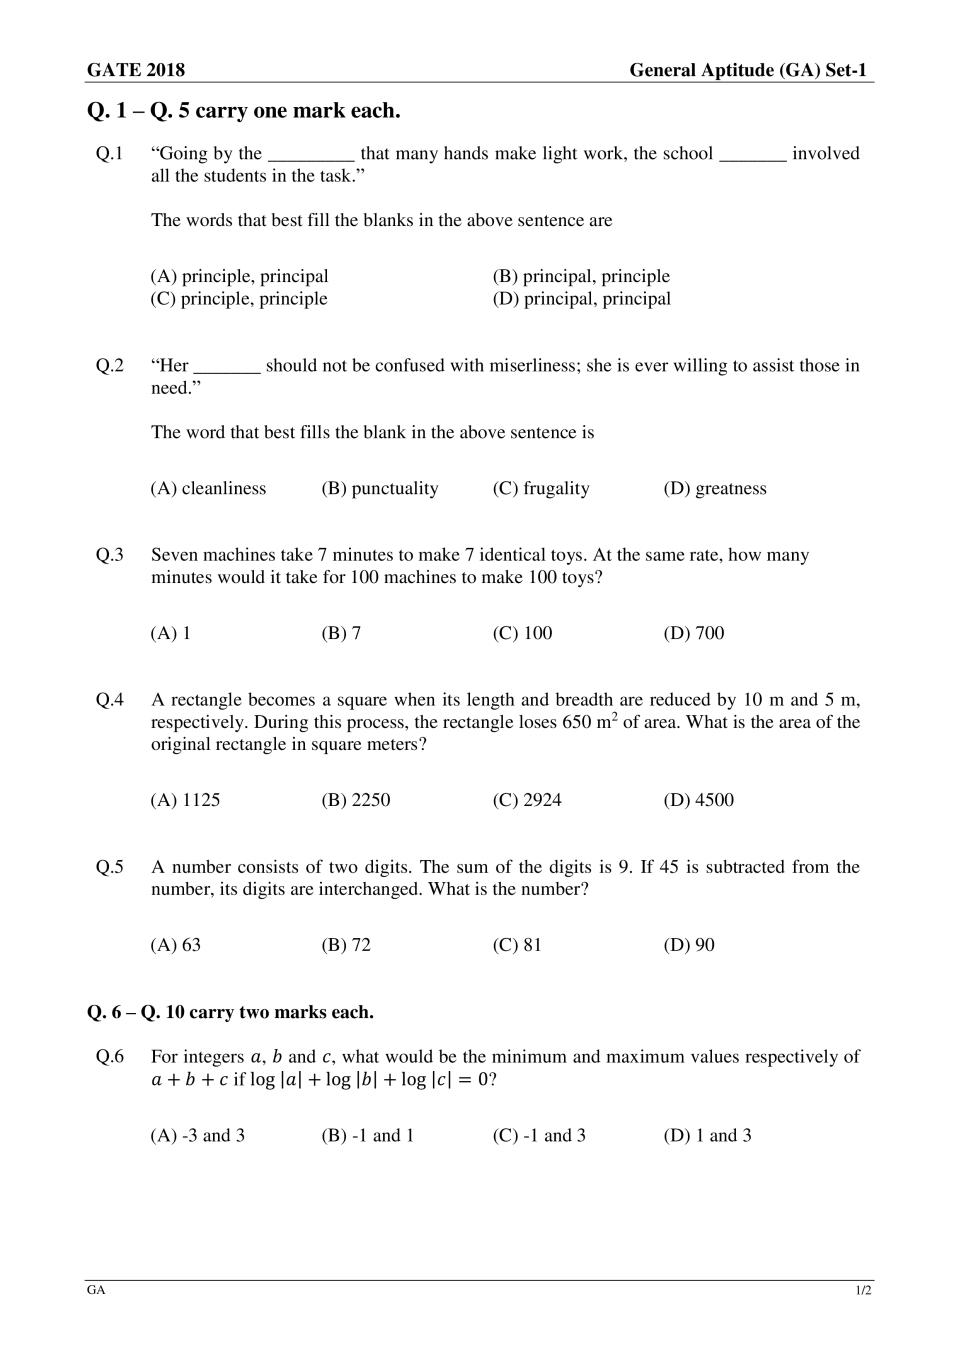 GATE 2018 Ecology and Evolution (EY) Question Paper with Answer - Page 1